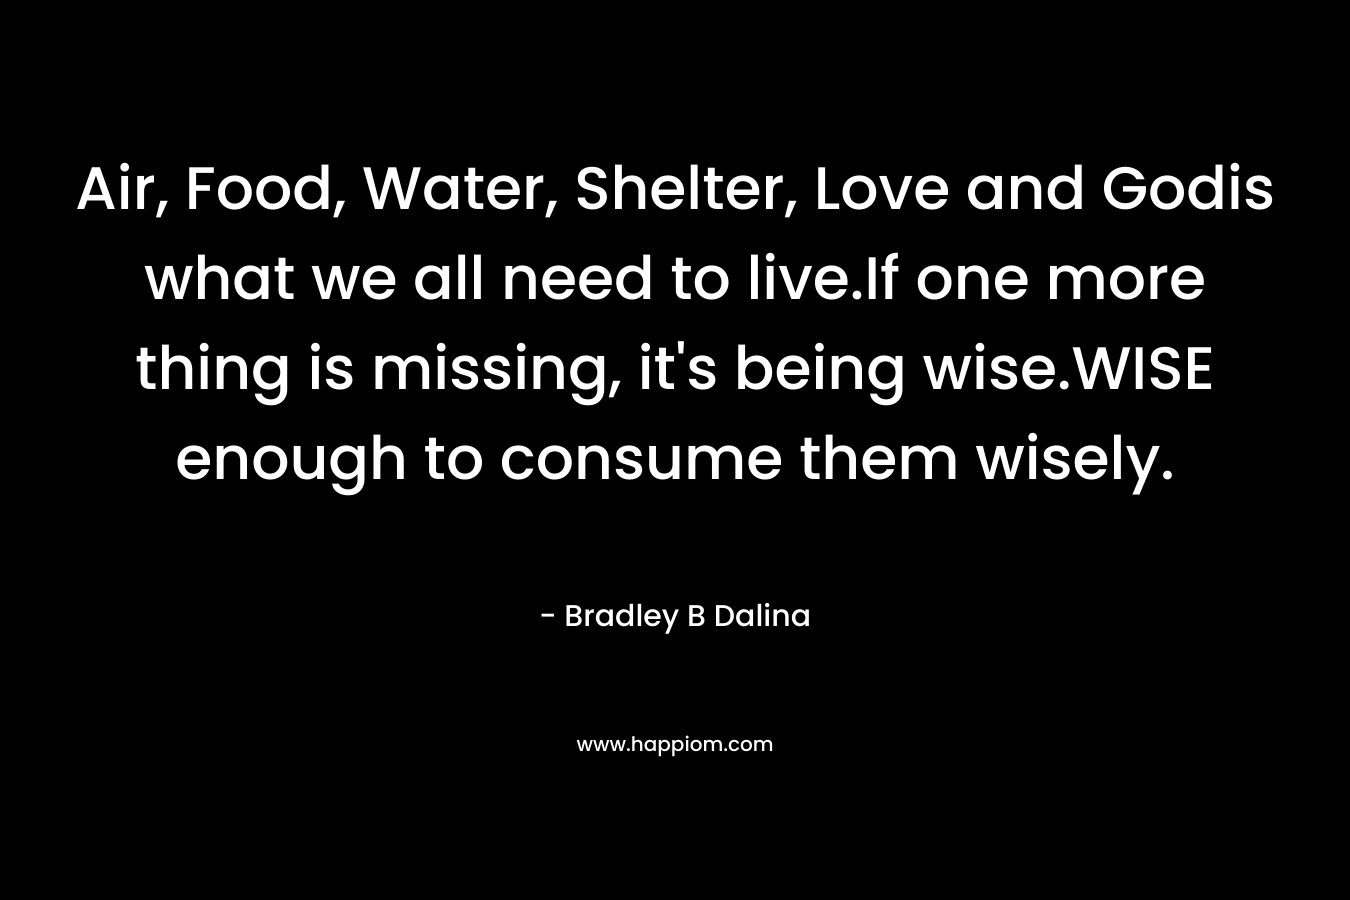 Air, Food, Water, Shelter, Love and Godis what we all need to live.If one more thing is missing, it's being wise.WISE enough to consume them wisely.